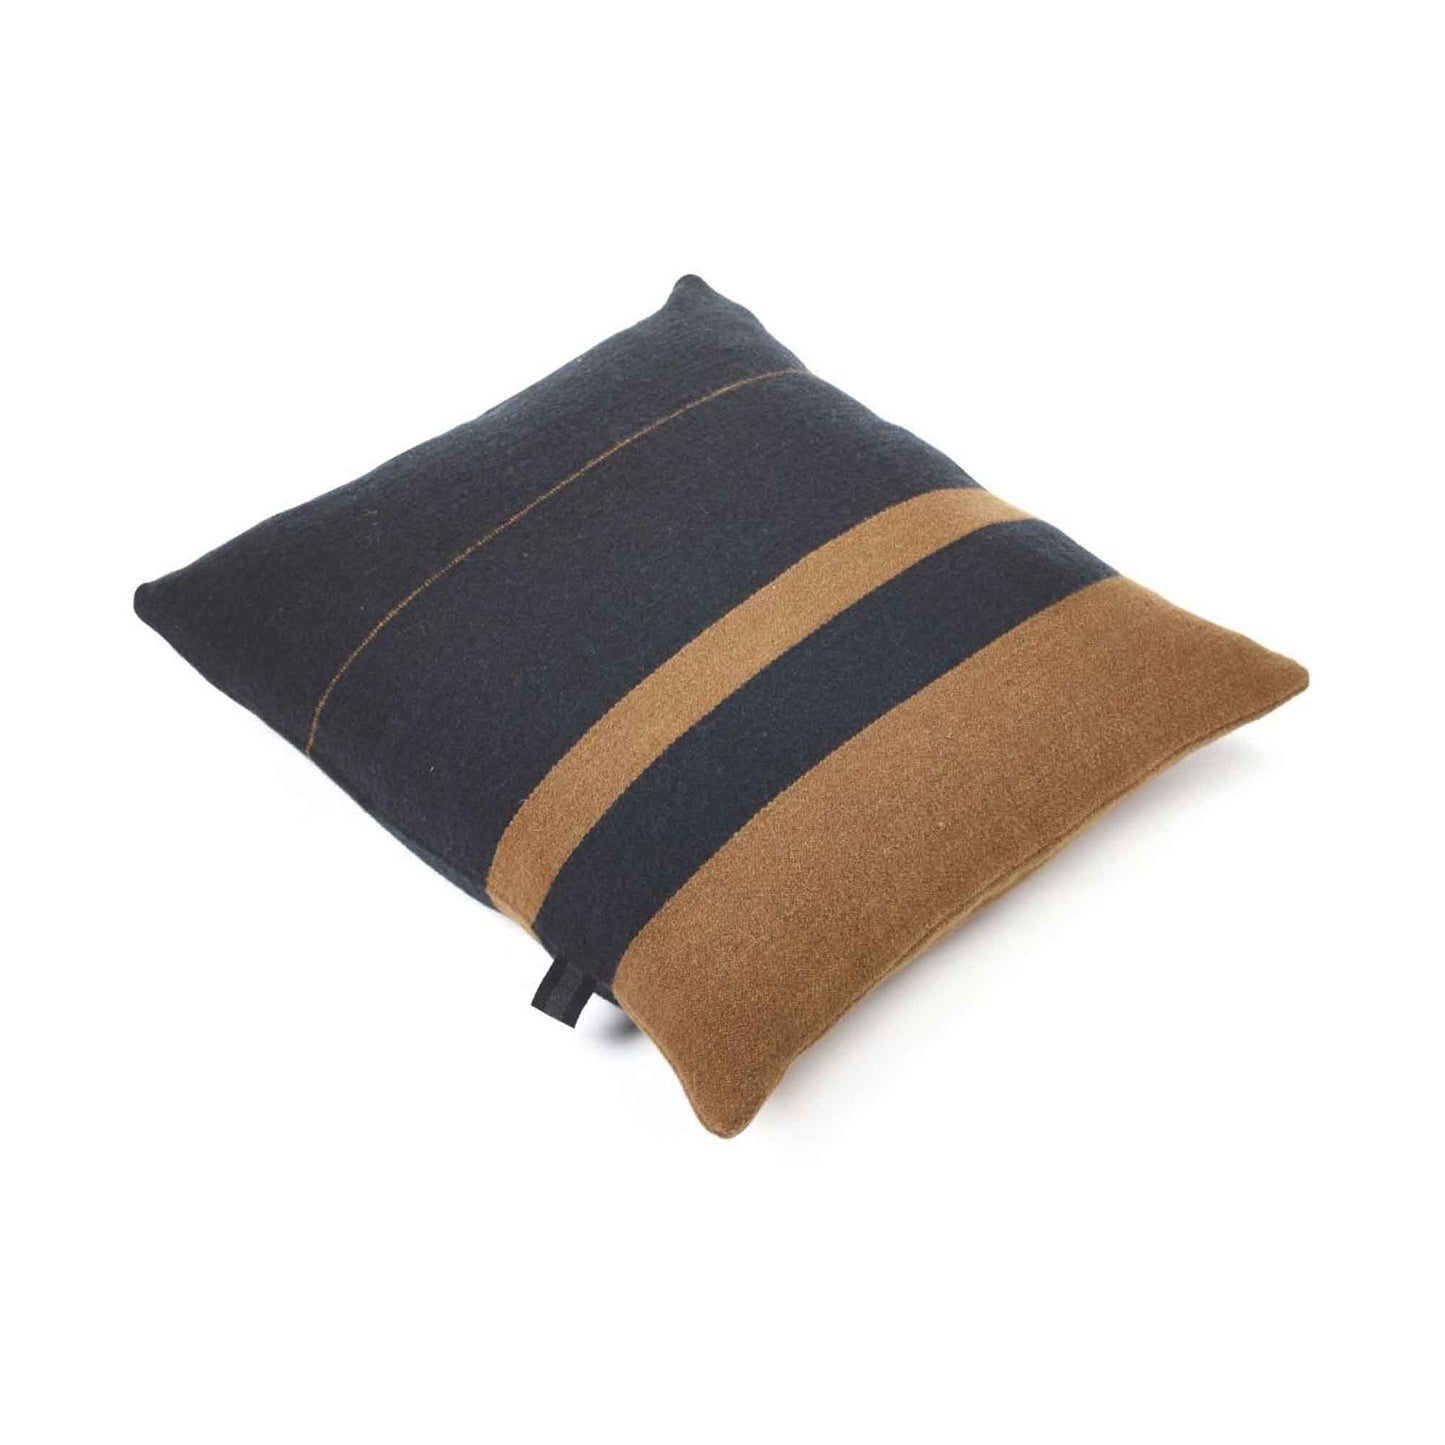 Linen and wool blend throw pillow cover angled flat lay product shot in color Oscar by Libeco for South Hous.